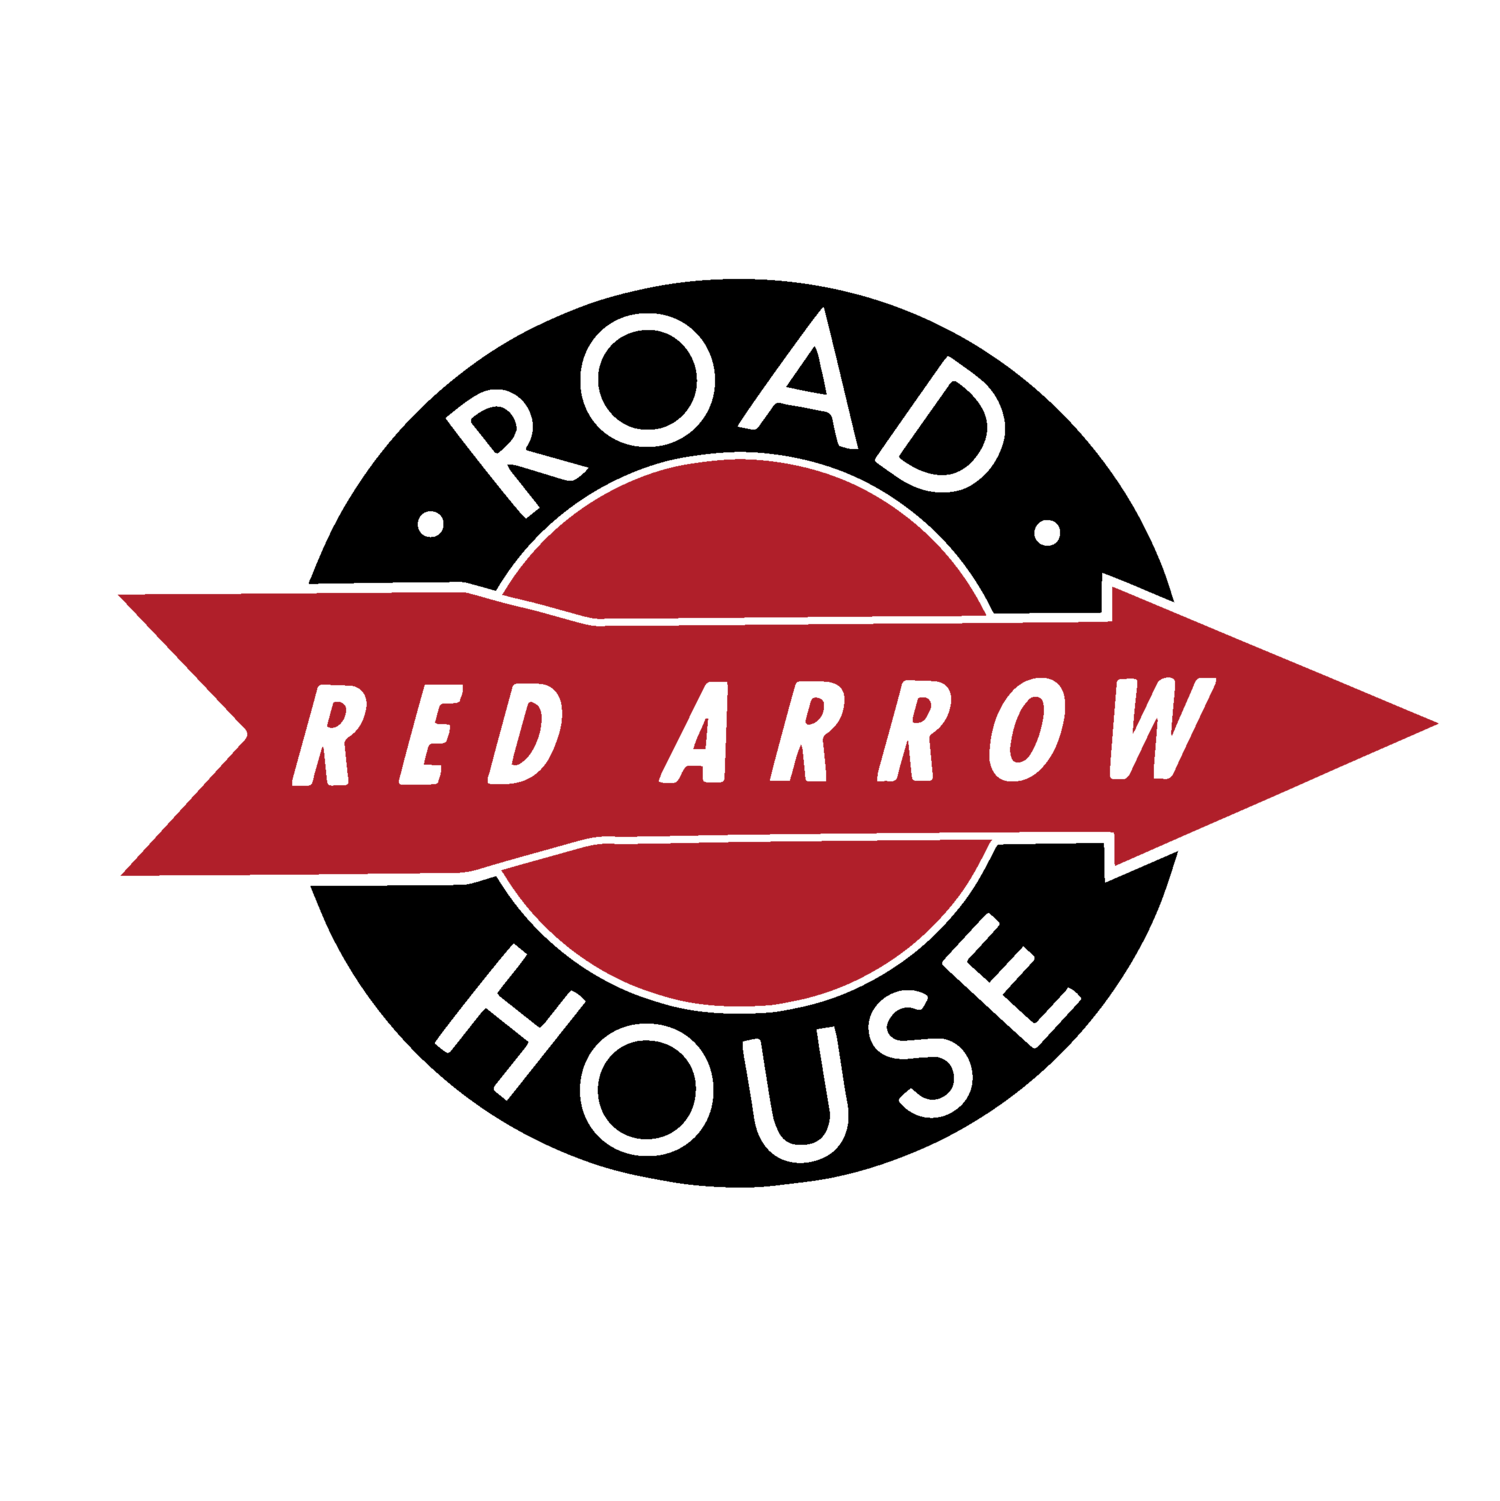 Red Arrow Roadhouse